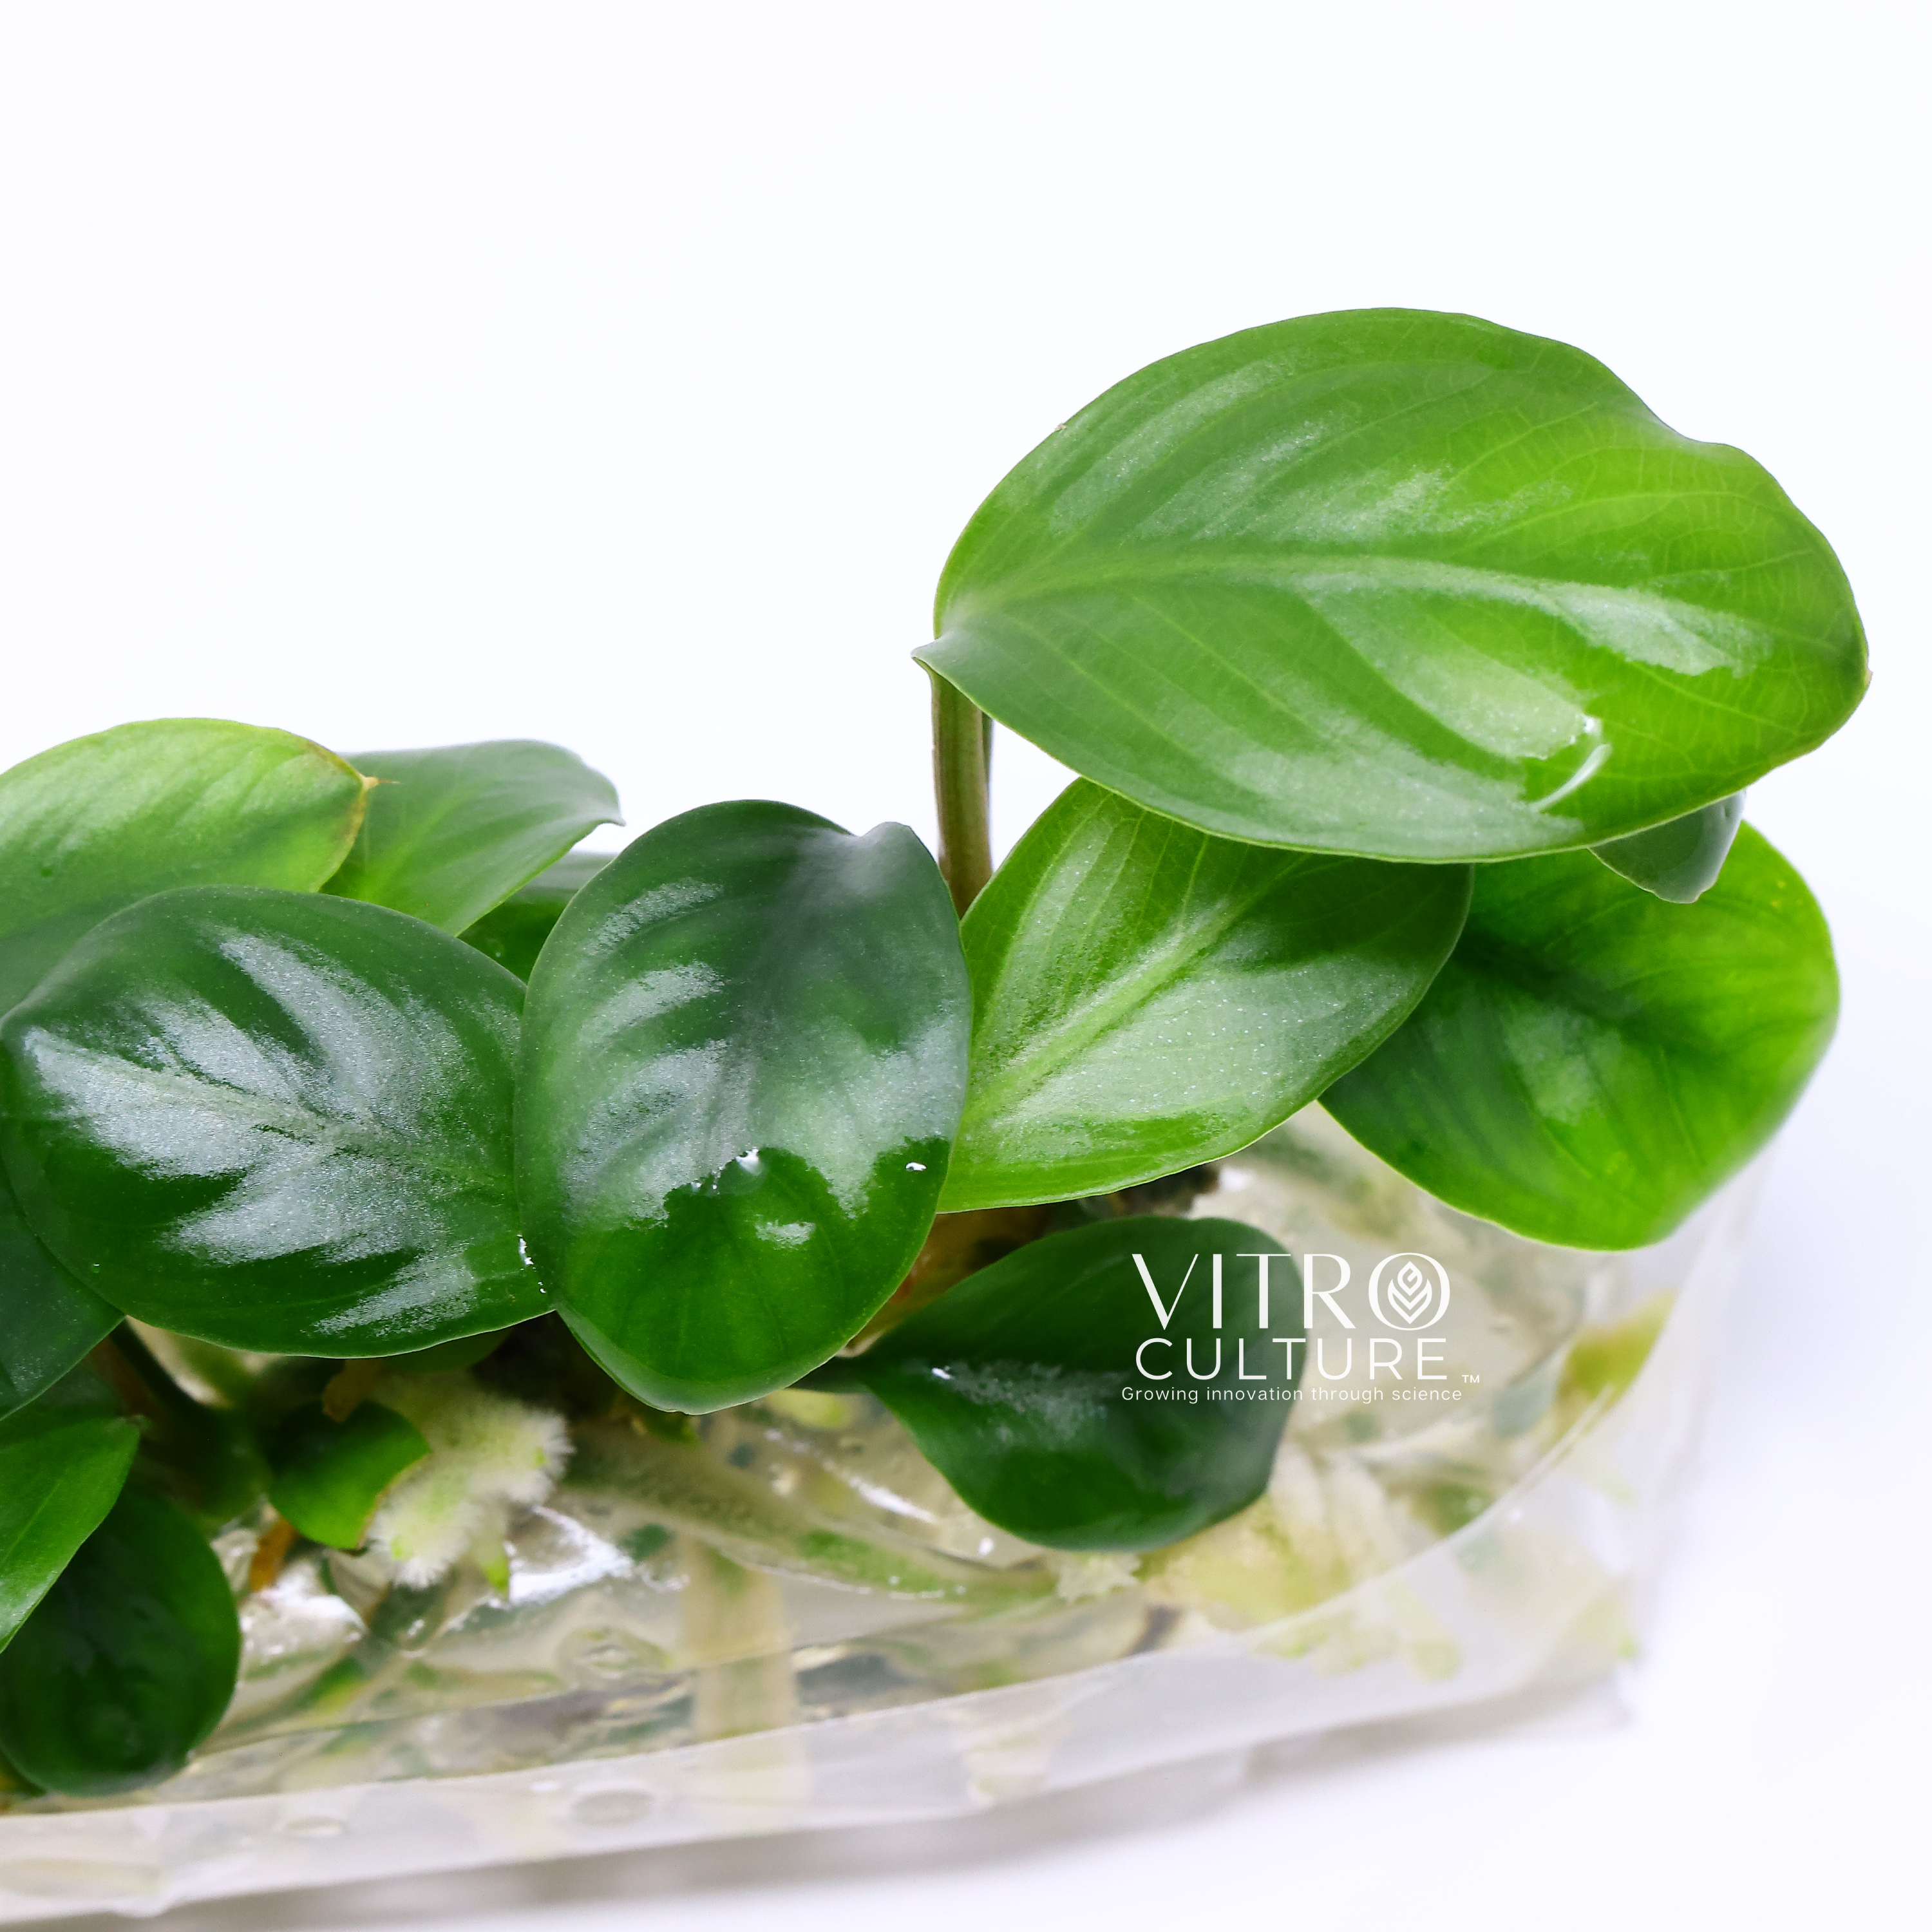 Anubias coffeefolia is a stunning aquatic plant that will bring a touch of elegance to any aquarium. Its unique leaves, which resemble coffee beans, are textured and create a beautiful contrast against smooth rocks or driftwood.  With Anubias coffeefolia vitro culture, you can be sure that you are getting a healthy and pest-free plant. The plant is grown in a nutrient-rich gel medium, without any soil or contaminants, to ensure its rapid and healthy growth.